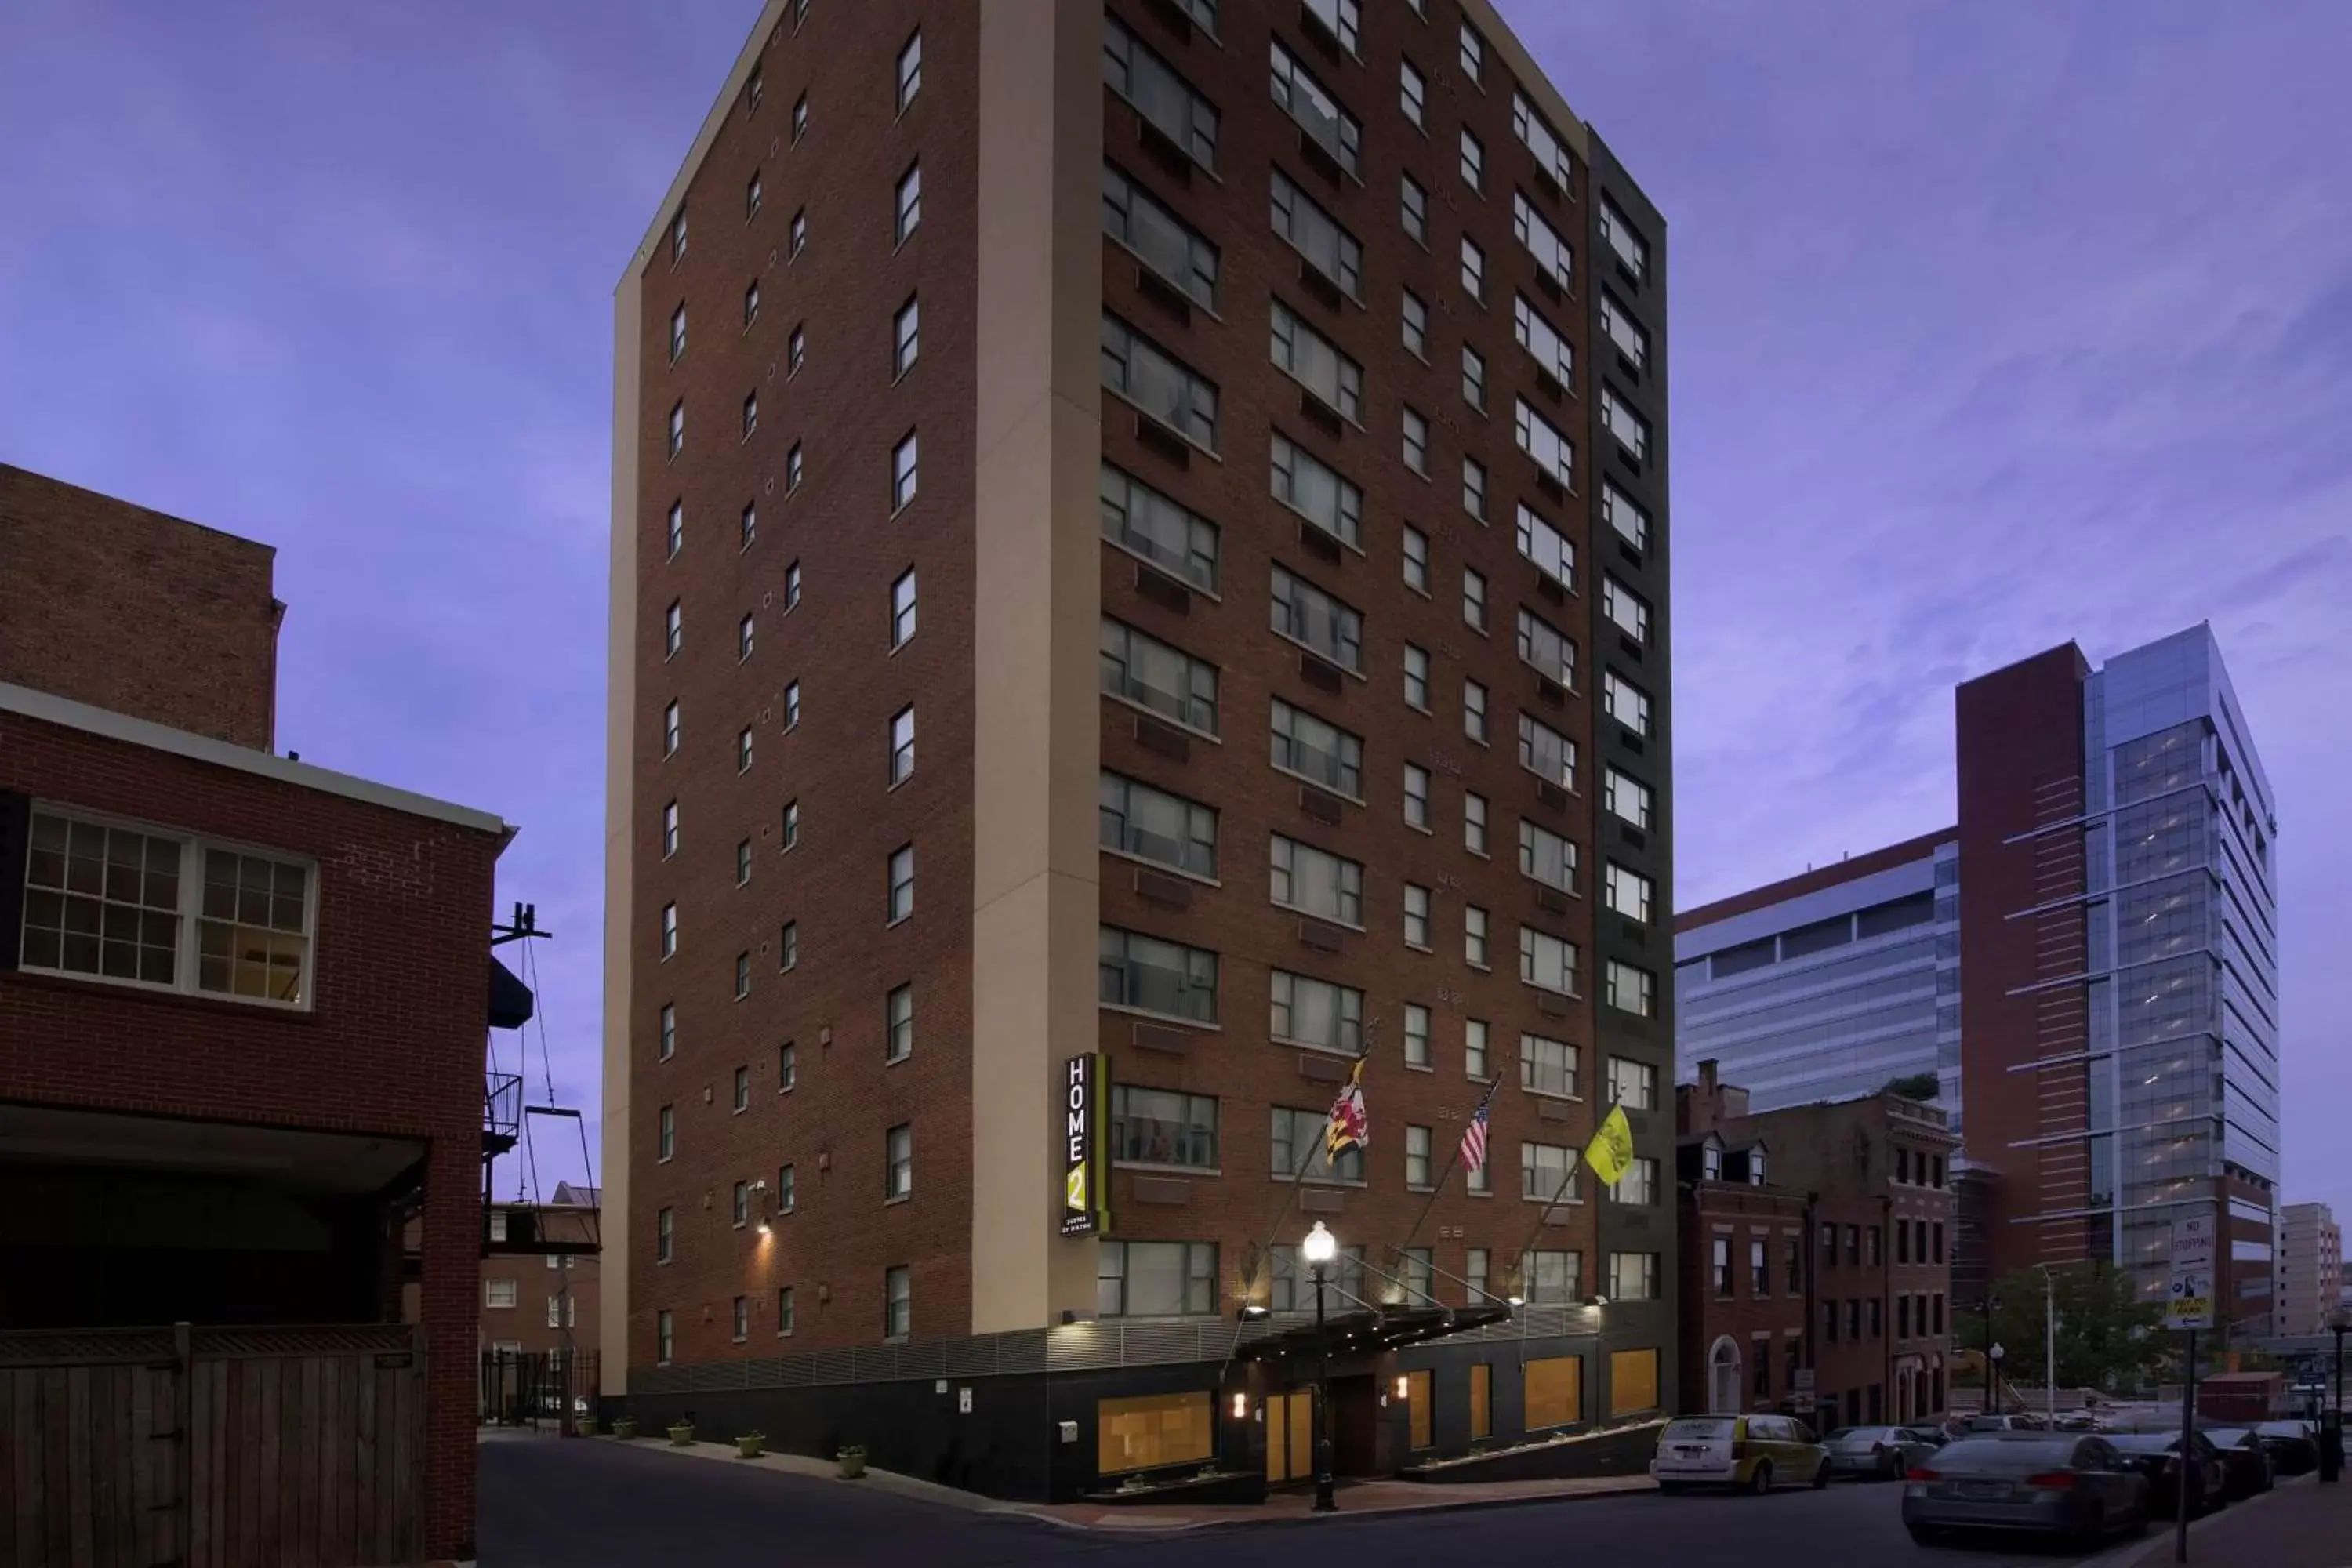 Property Building in Home2 Suites by Hilton Baltimore Downtown